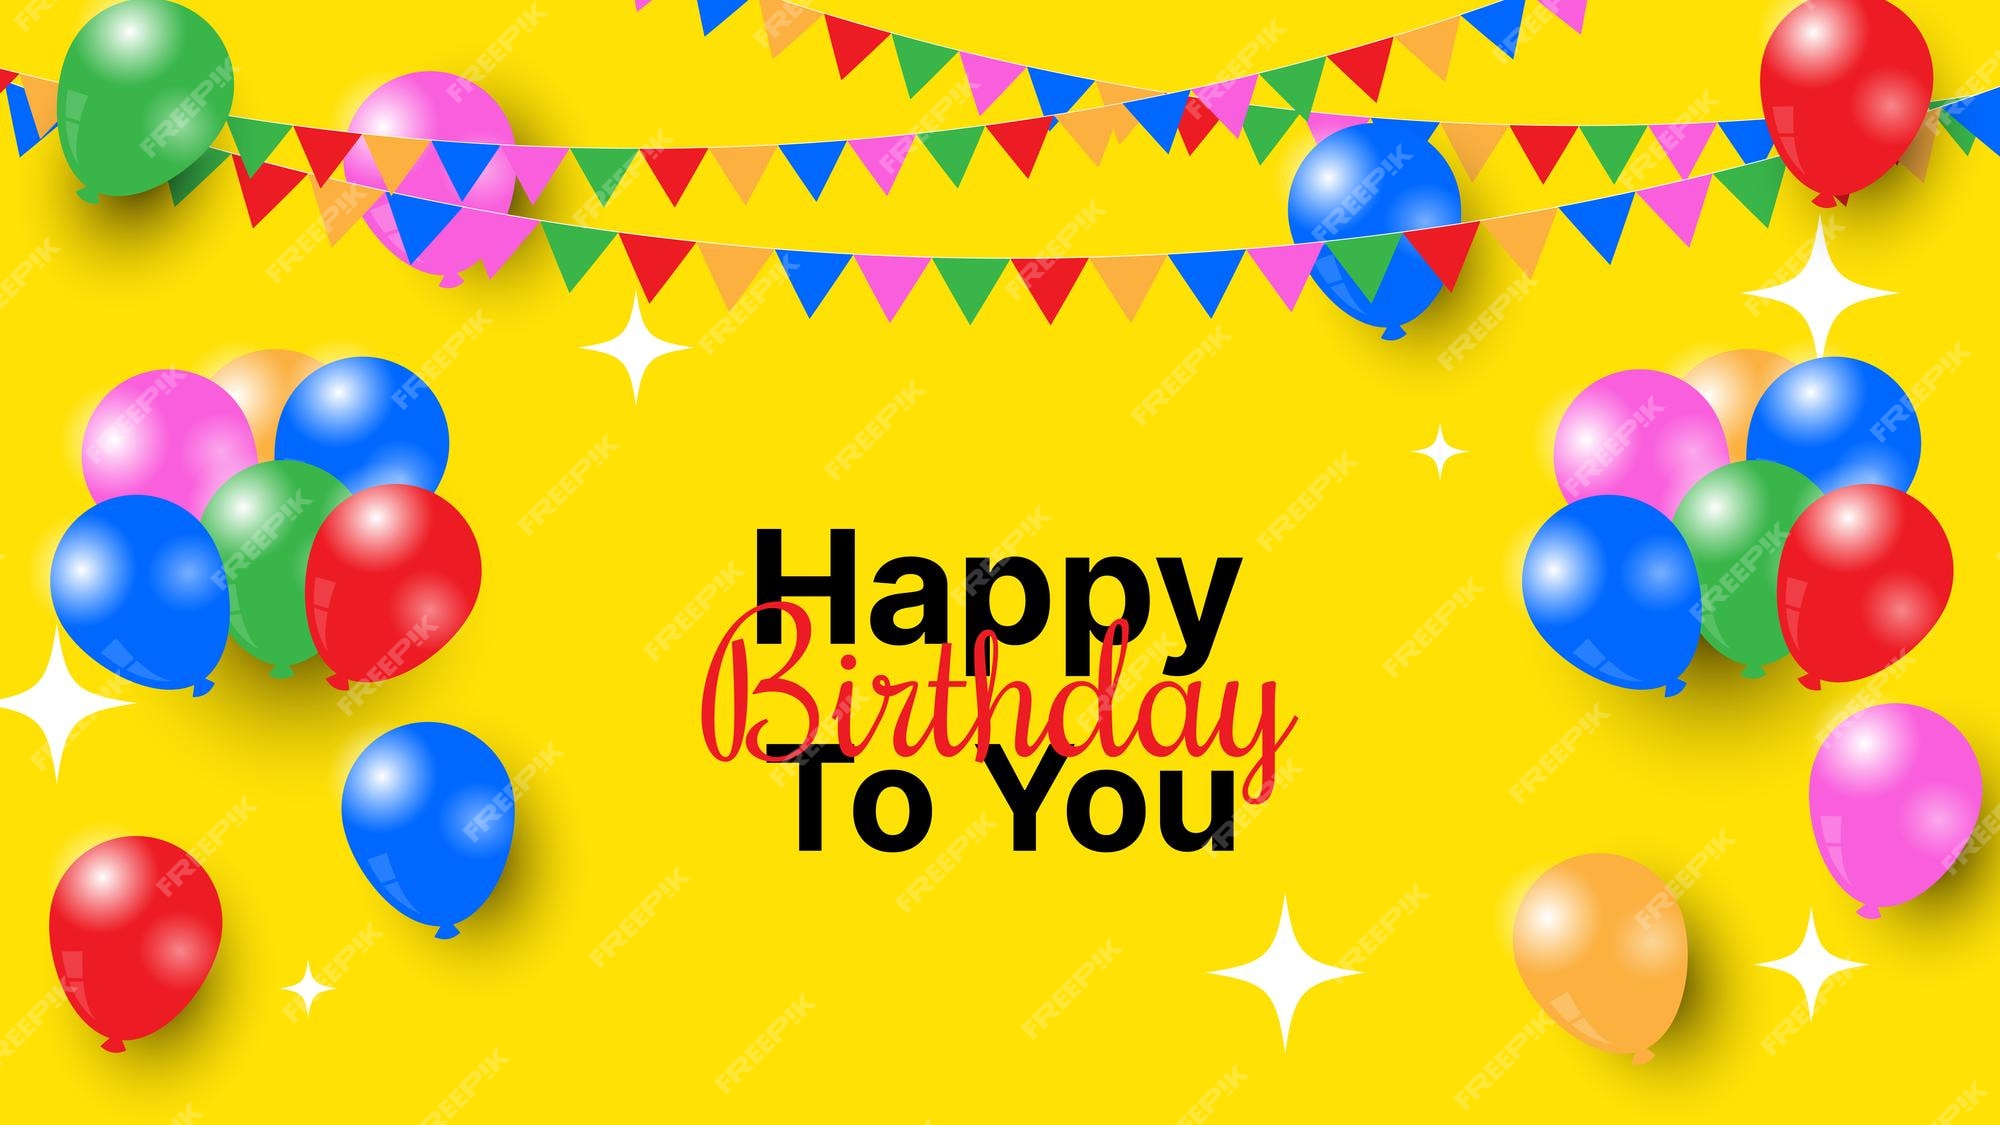 Premium Vector | Colorful happy birthday background with balloons and  confetti suitable for greeting card poster social media post etc vector  illustration